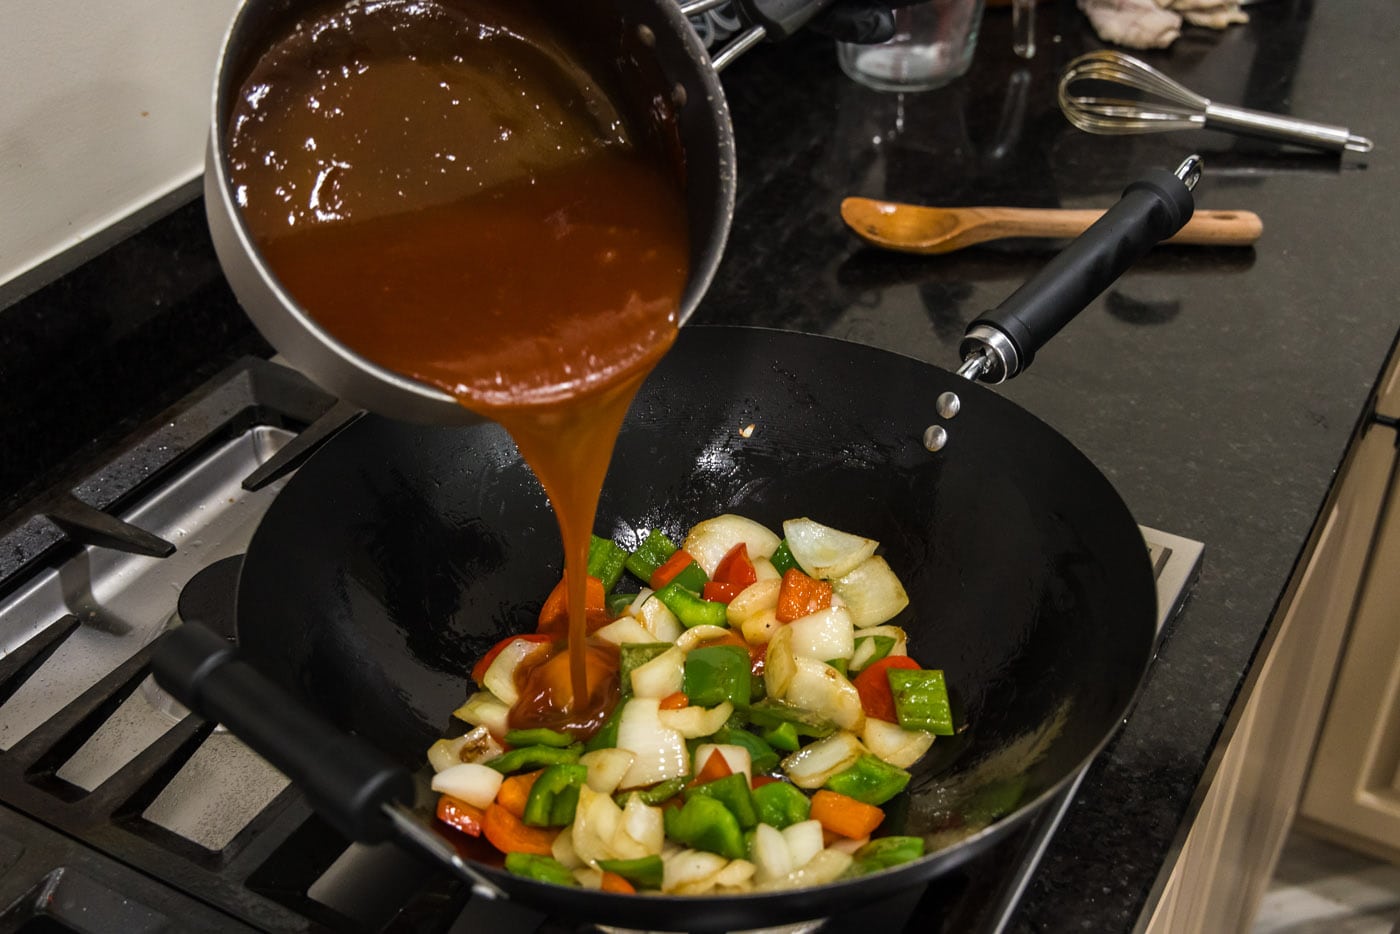 pouring sweet and sour sauce over stir fried vegetables